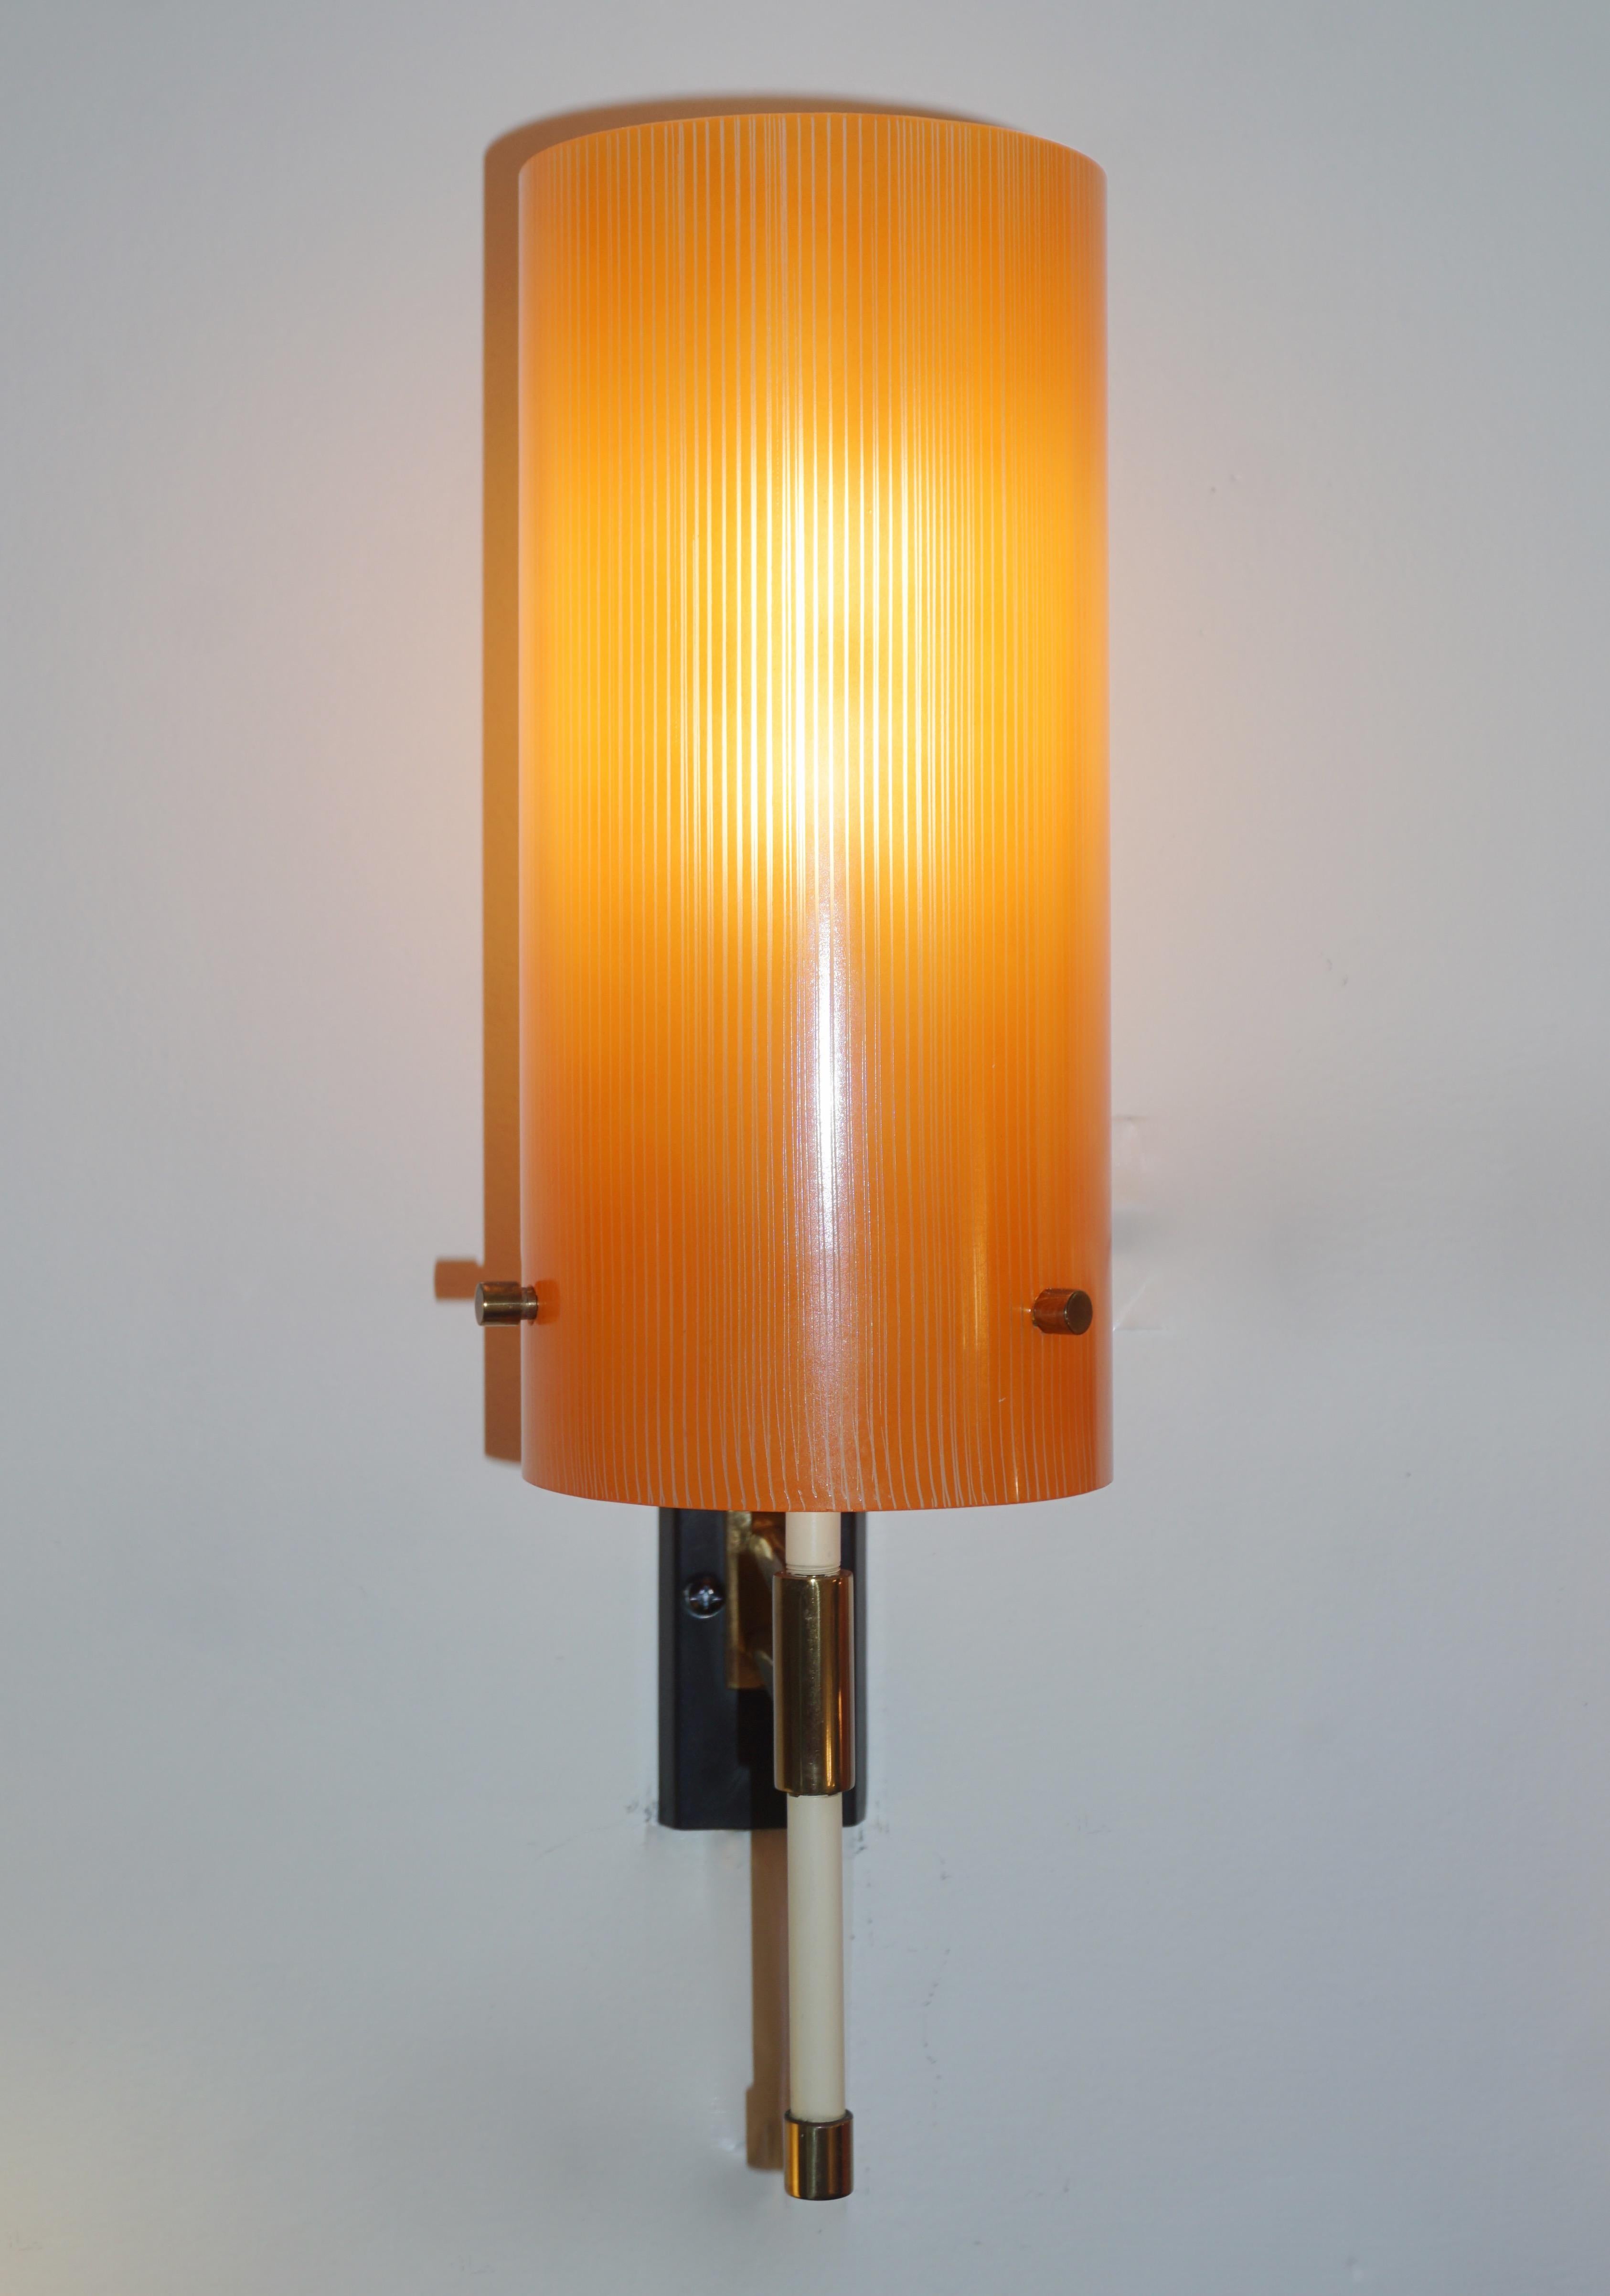 Rare Mid-Century Modern pair of glass sconces, entirely handcrafted in Italy by Casey Fantin, Florence, a wonderful example of Minimalist midcentury Italian design. High quality of manufacturing with slender cylindrical frosted glass shades (9.5 in.